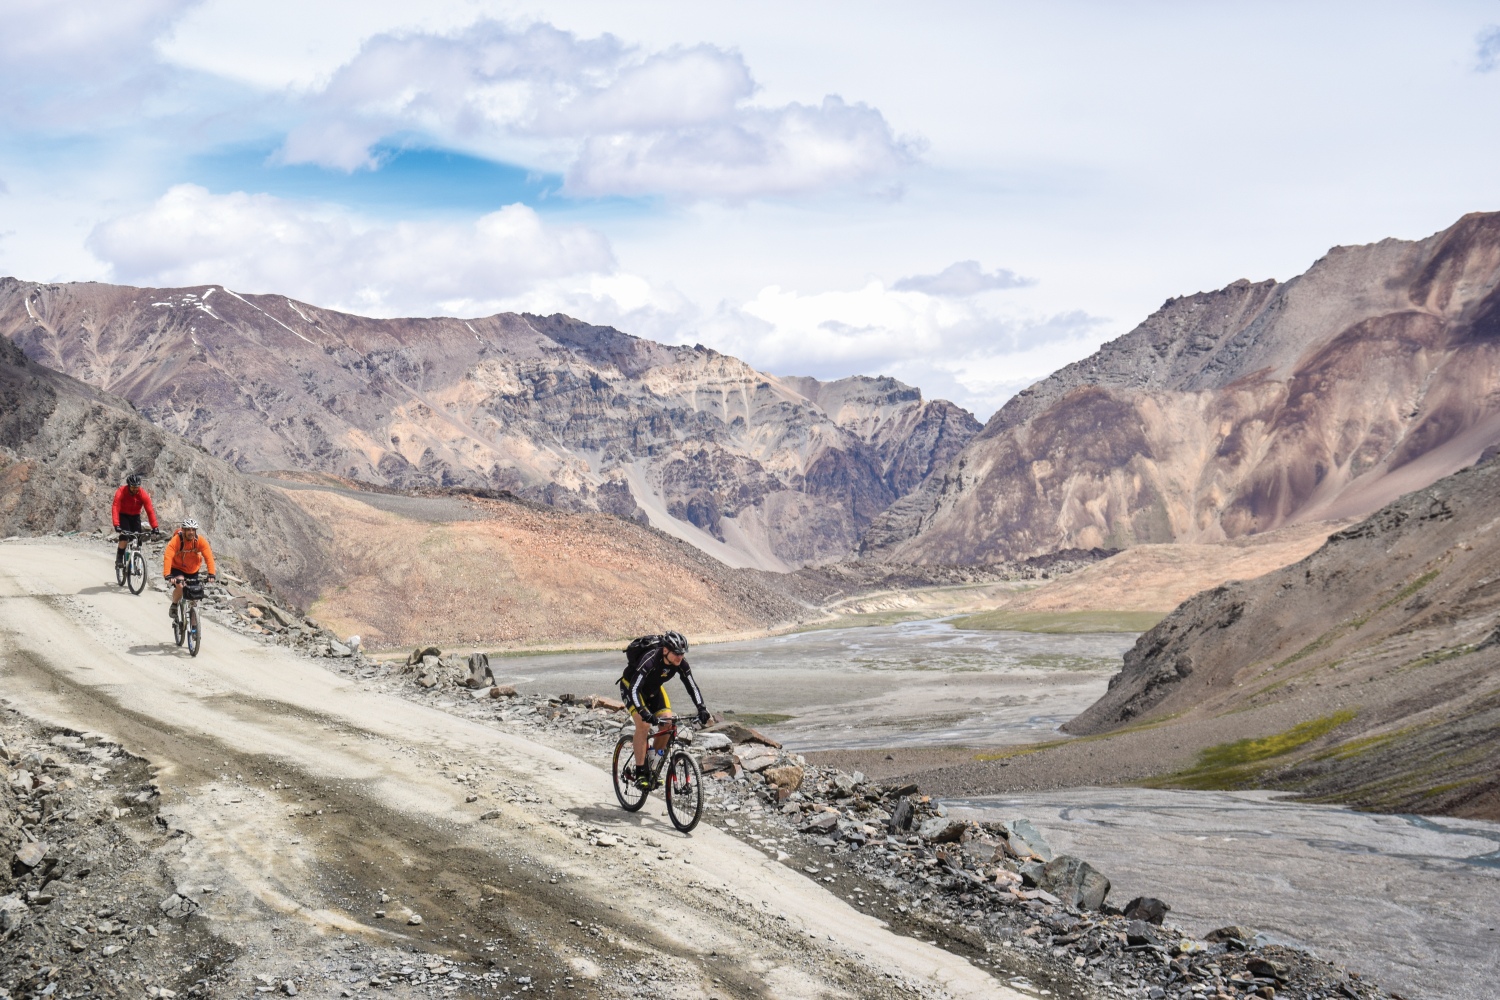 Group of cyclists riding down rocky terrain, Himalayan Mountains